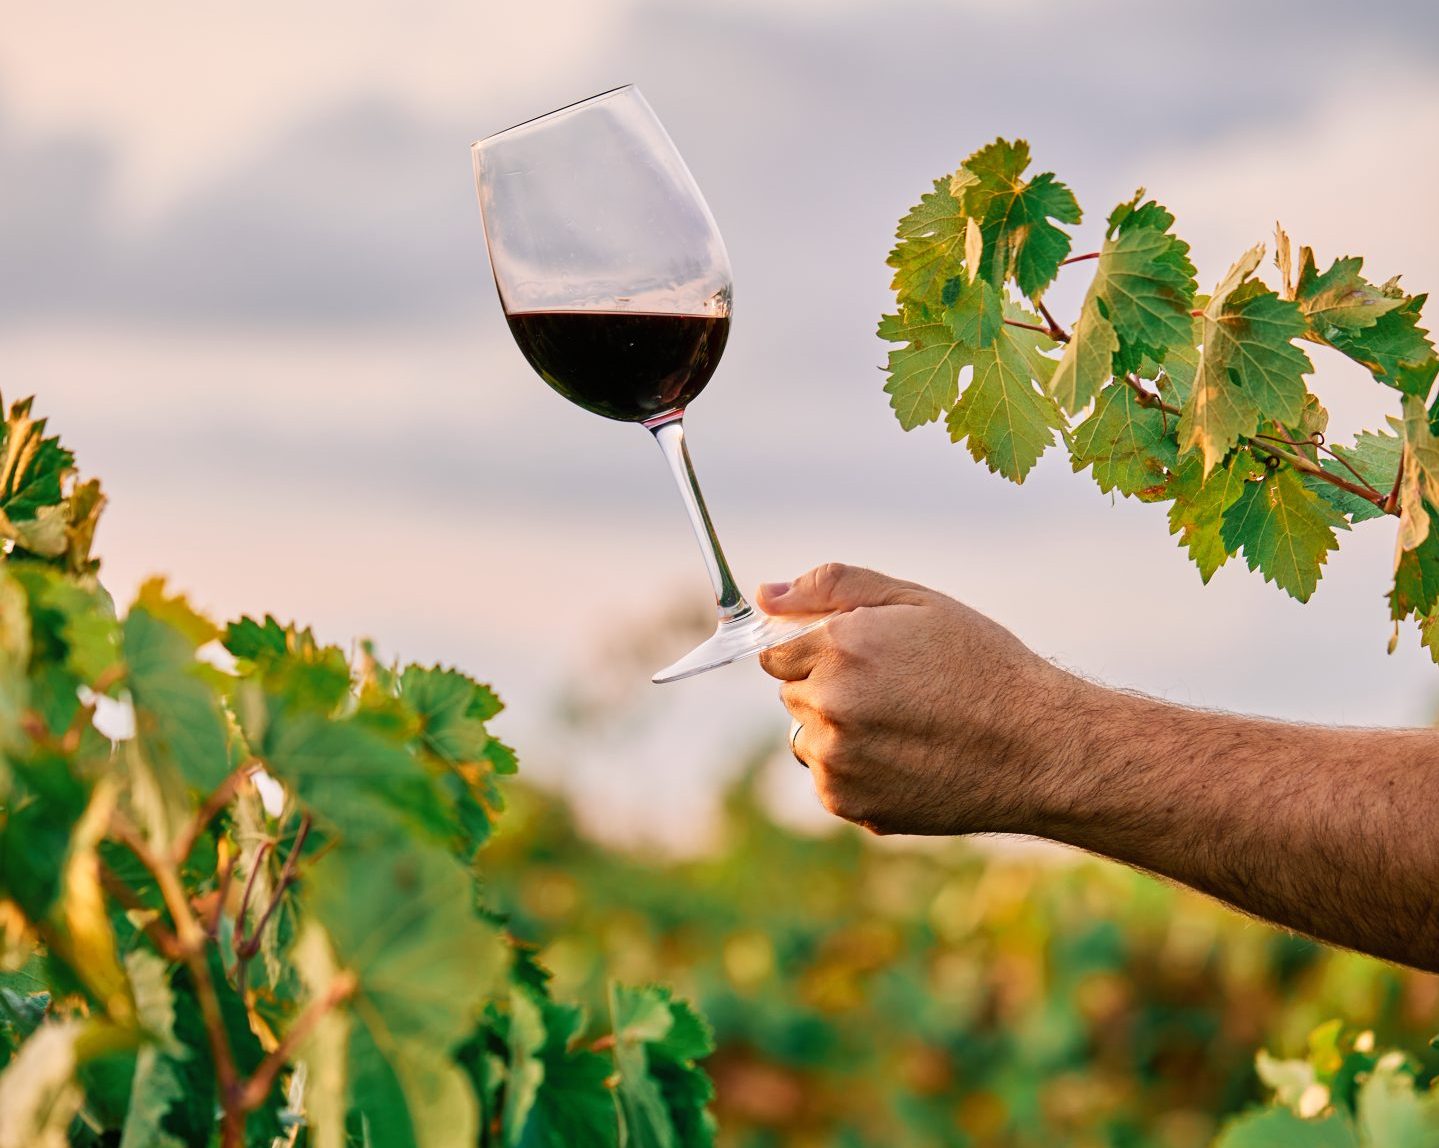 A vertical shot of a person holding a glass of wine in the vineyard under the sunlight